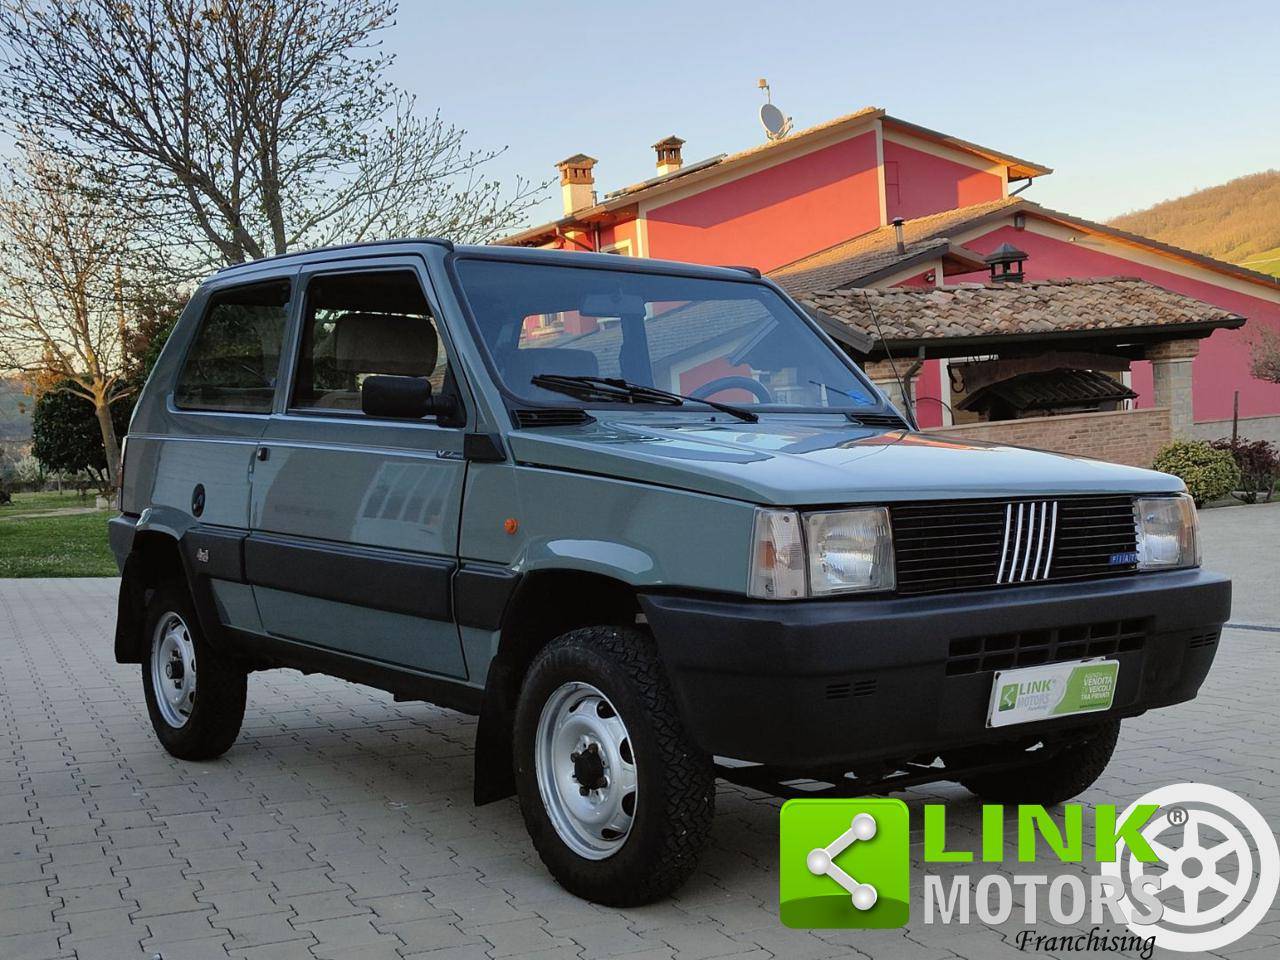 1989 FIAT PANDA 4X4 - 38,200 MILES FROM NEW for sale by auction in London,  United Kingdom